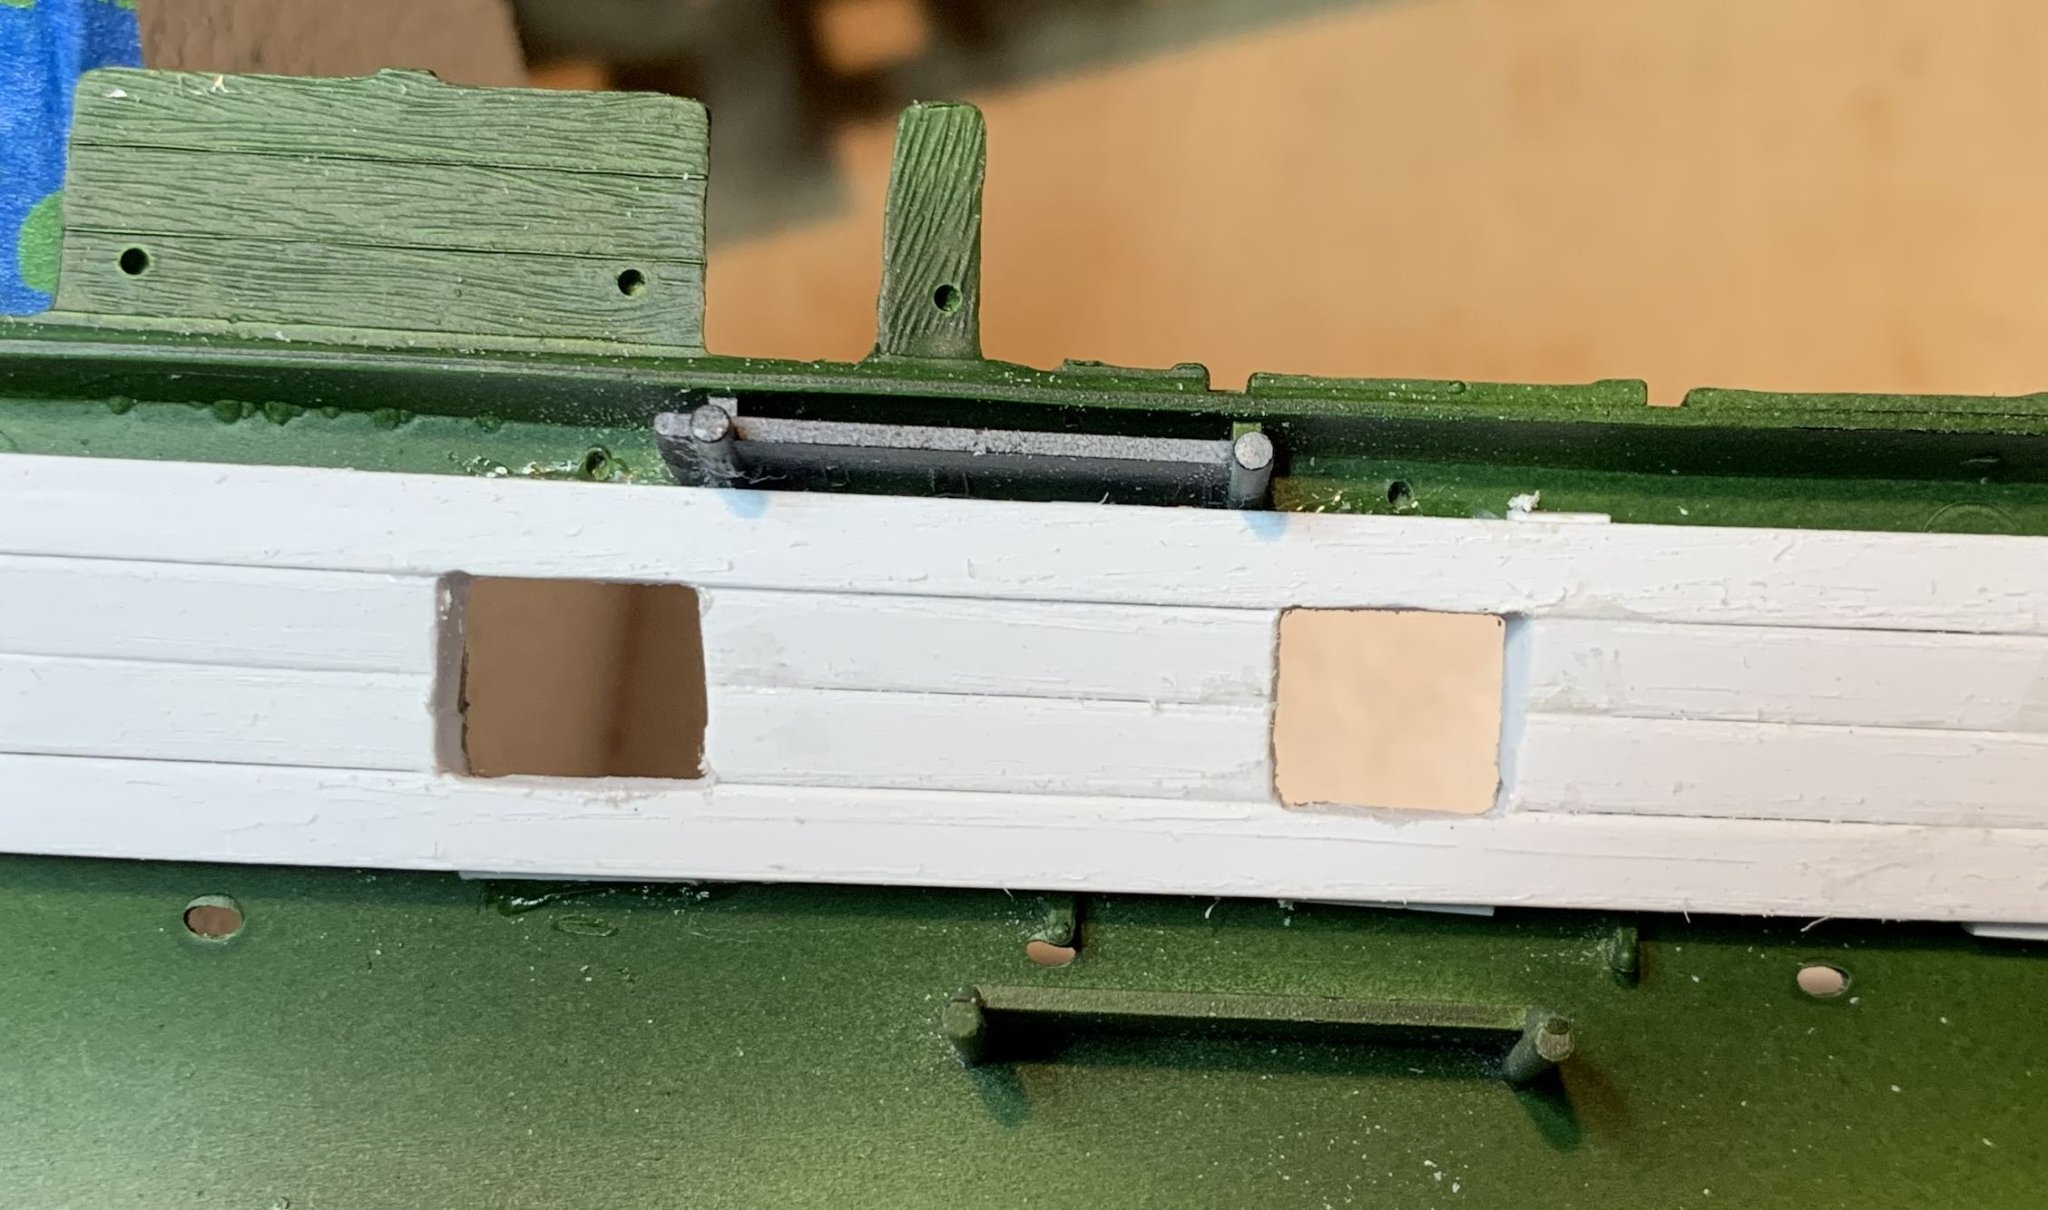 First attempt at cutting away on a model. Clearly don't have the proper  tools. Used a scriber and sanding sticks. What's the best tool for cutting  away pieces on plastic models? 